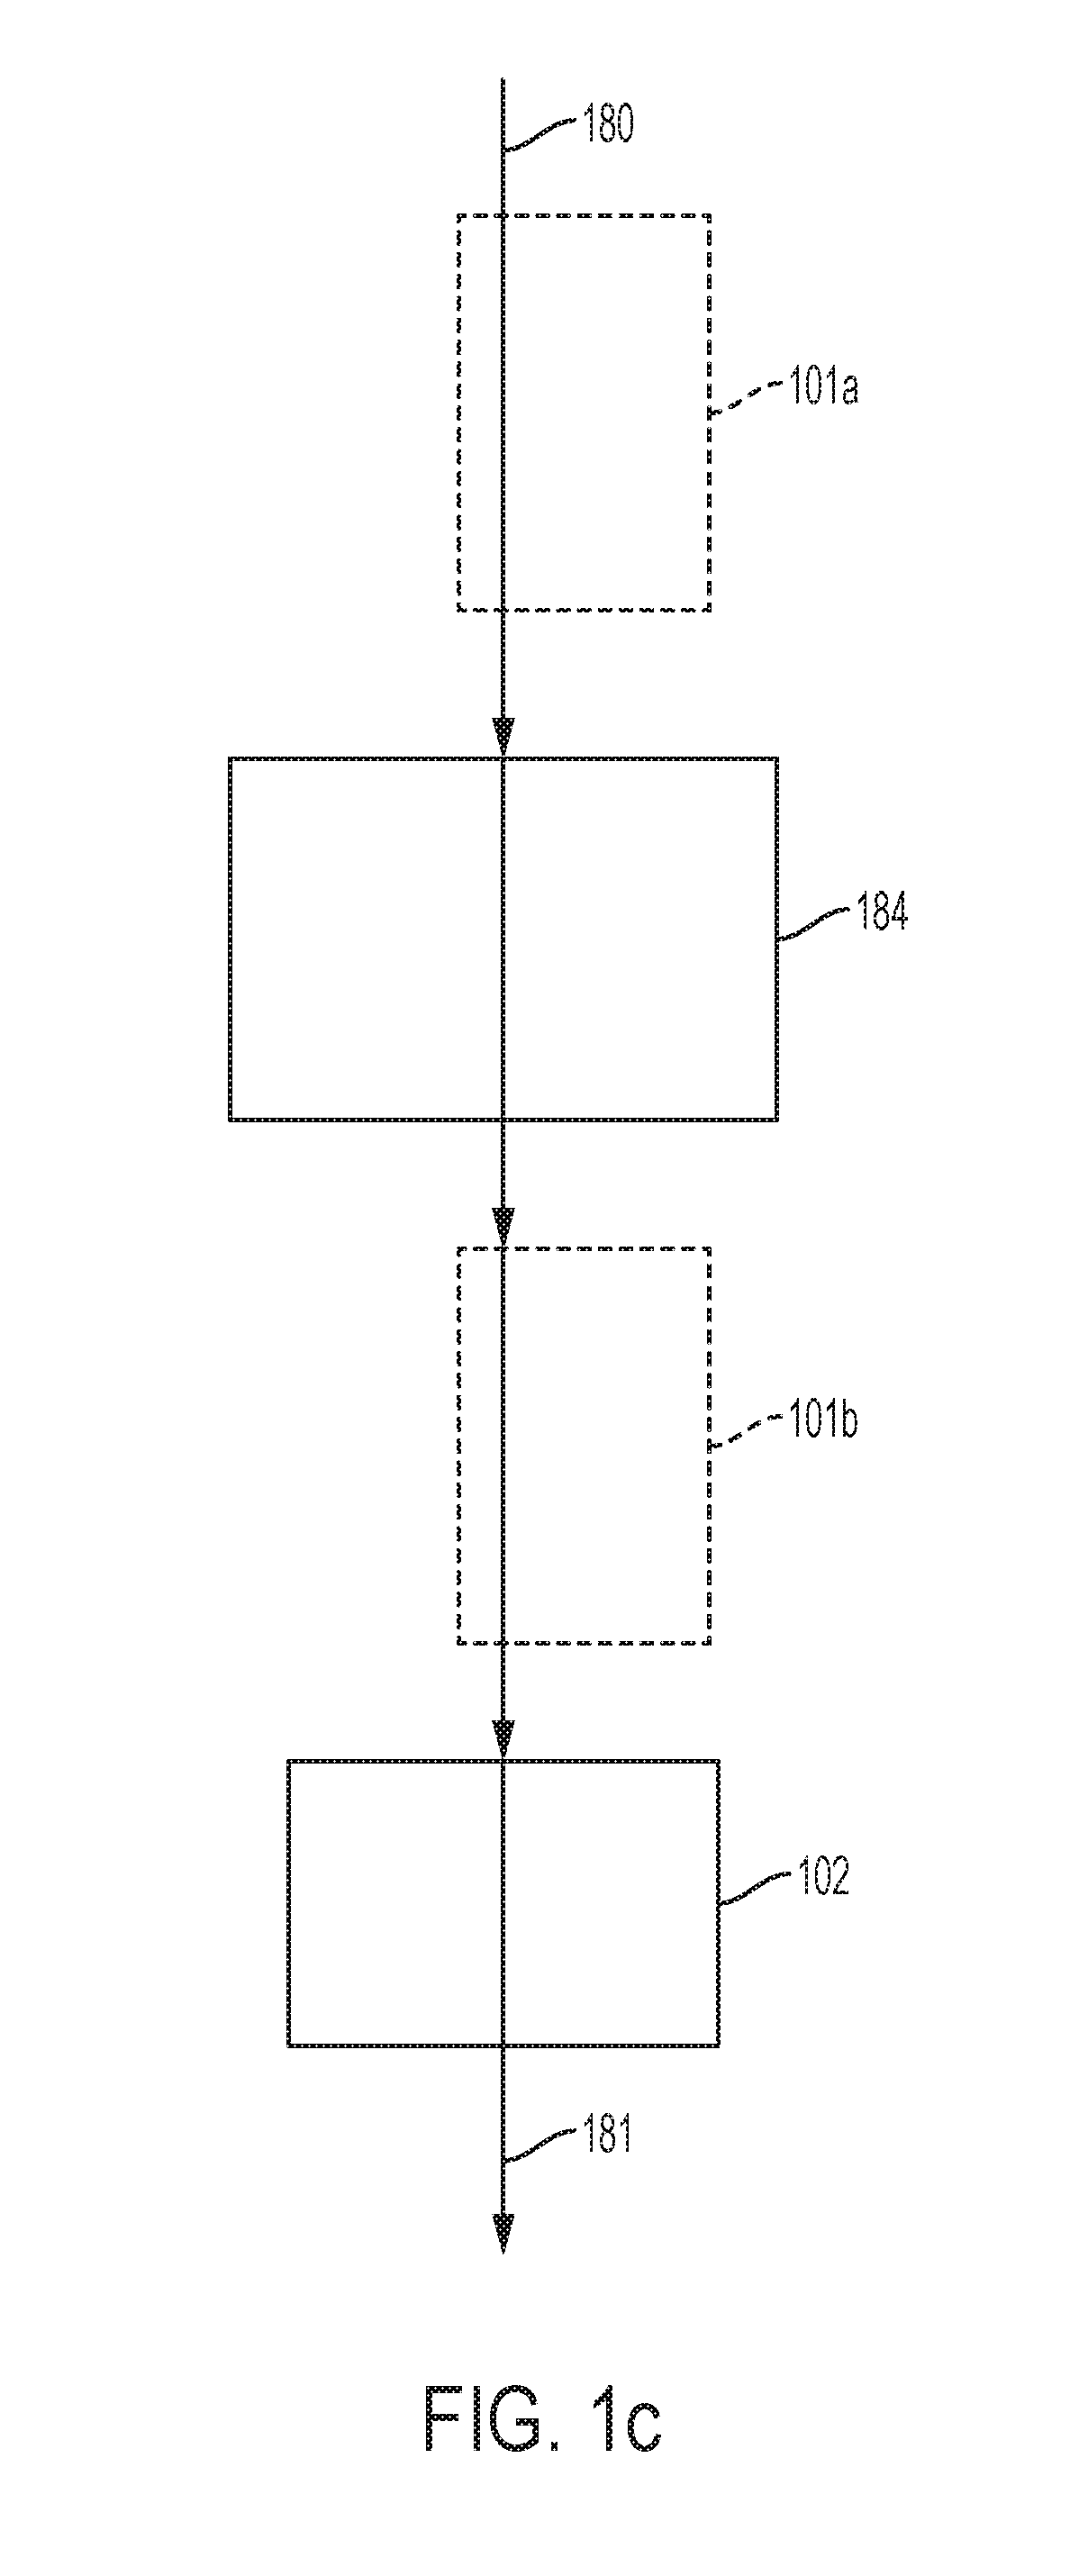 Systems and methods for power production including ion transport components